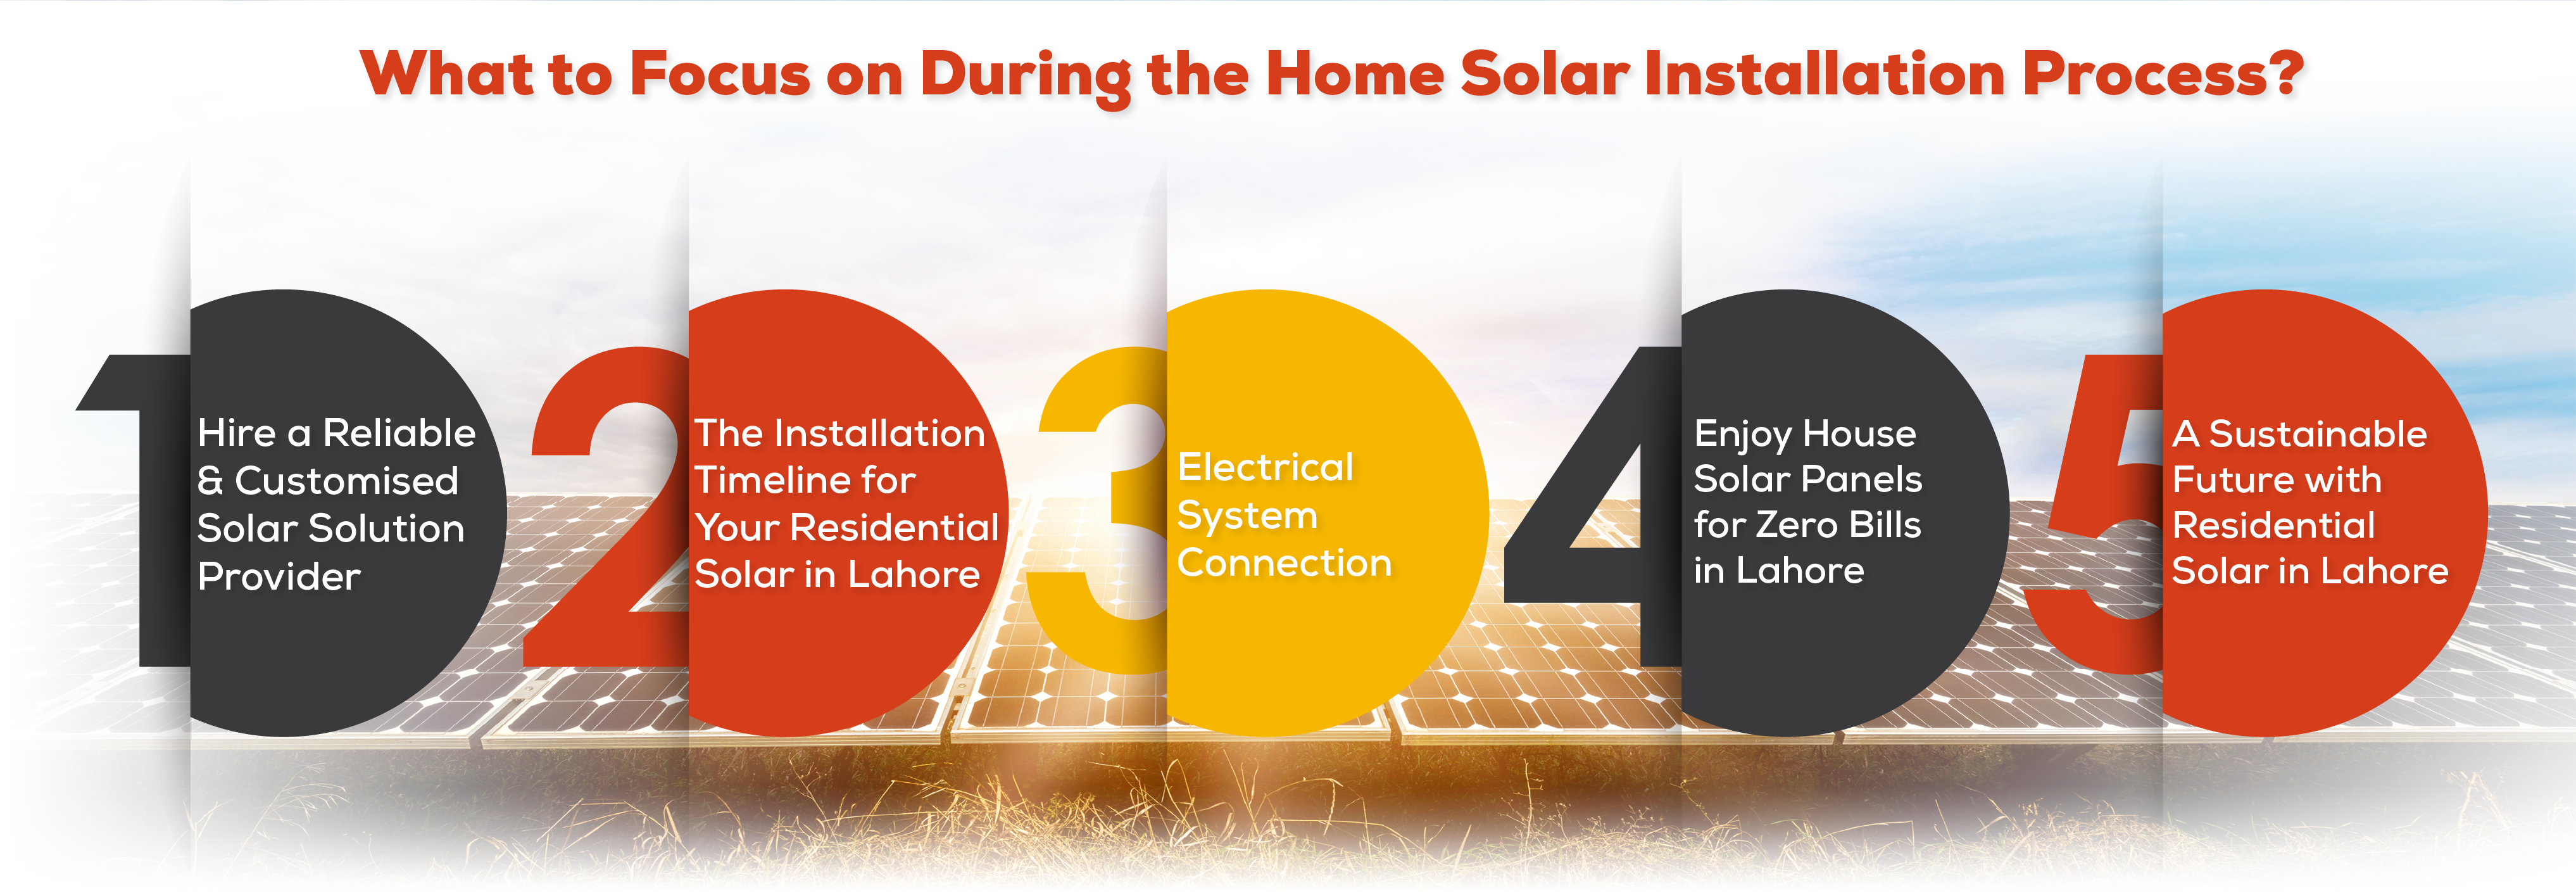 What to Focus on During the Home Solar Installation Process? 